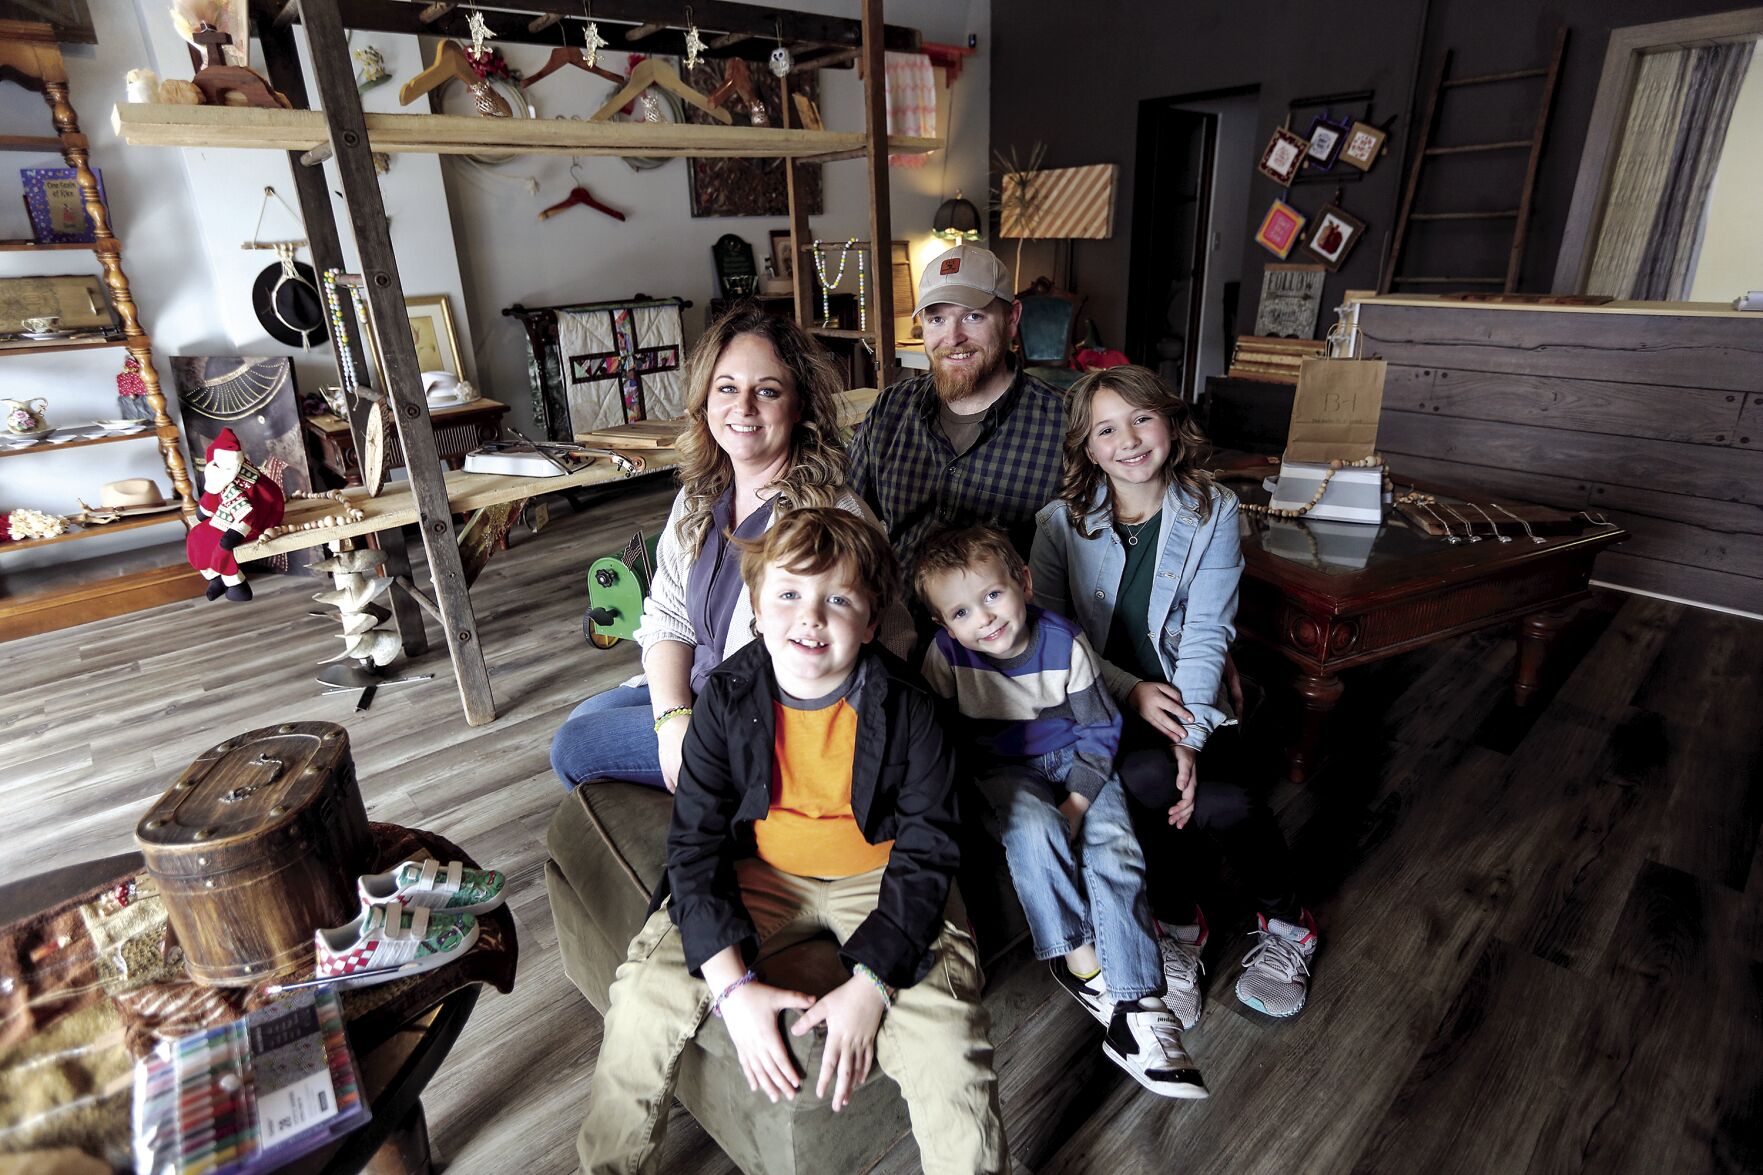 Ron Butler and his wife, Elizabeth, along with their children (from left) Henry, 7, Beau, 4, and Lillian, 11, sit inside their store, Butler Homestead, located at 1500 Central Ave. in Dubuque on Friday.    PHOTO CREDIT: Dave Kettering